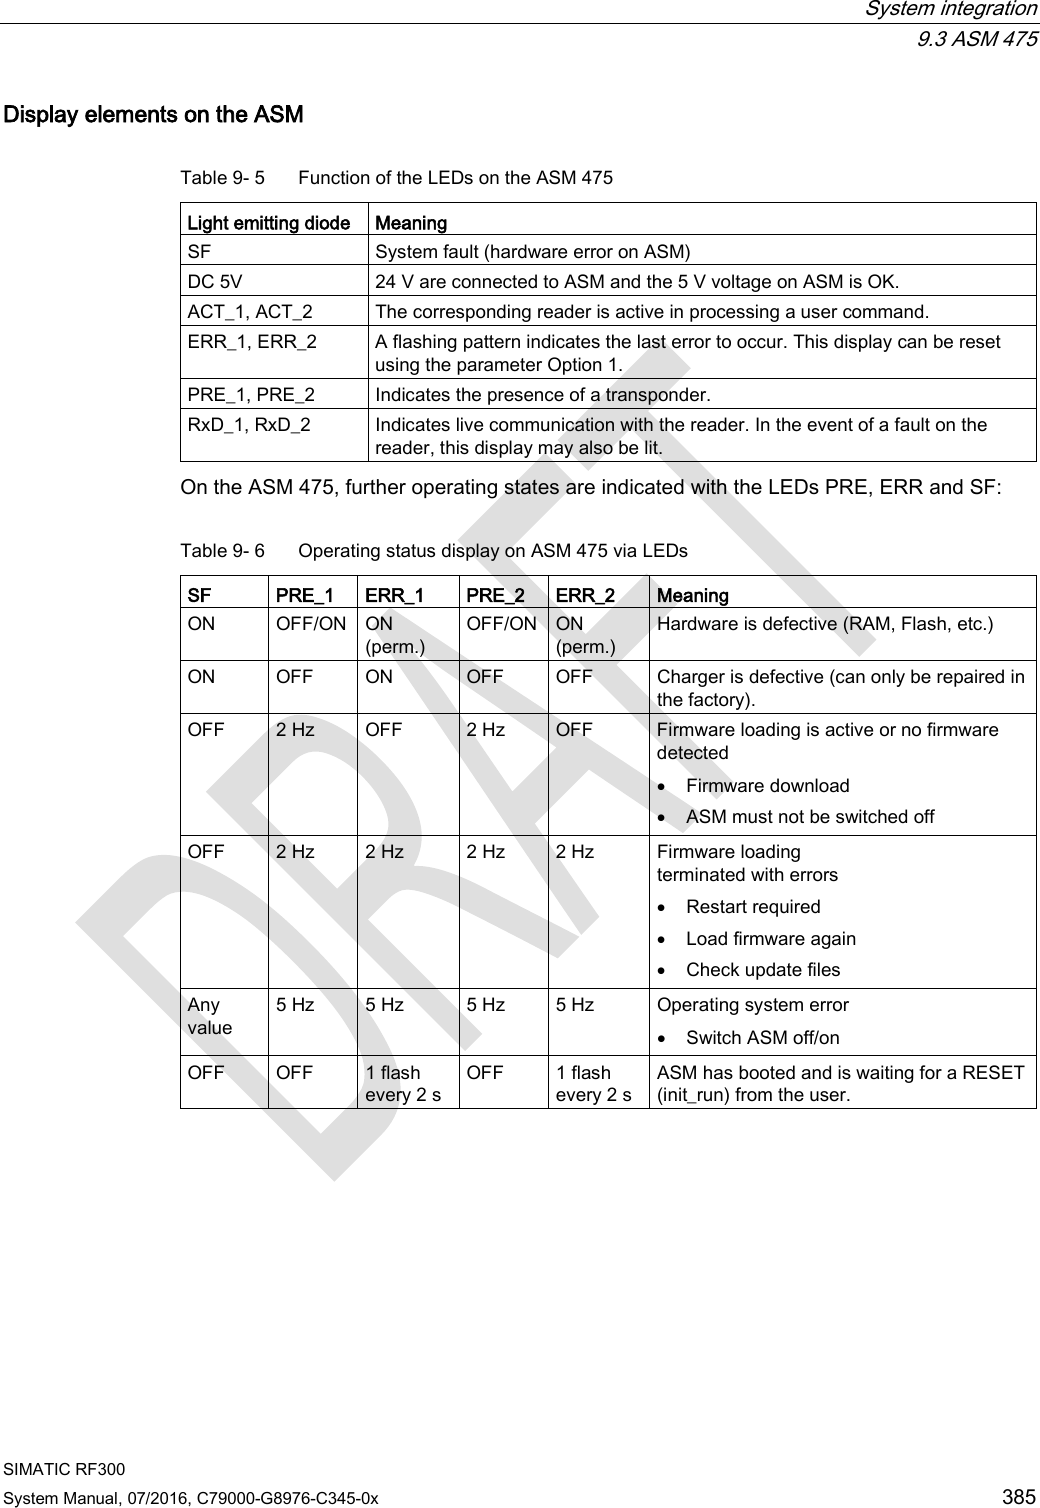  System integration  9.3 ASM 475 SIMATIC RF300 System Manual, 07/2016, C79000-G8976-C345-0x 385 Display elements on the ASM Table 9- 5  Function of the LEDs on the ASM 475 Light emitting diode Meaning SF System fault (hardware error on ASM) DC 5V 24 V are connected to ASM and the 5 V voltage on ASM is OK. ACT_1, ACT_2 The corresponding reader is active in processing a user command. ERR_1, ERR_2 A flashing pattern indicates the last error to occur. This display can be reset using the parameter Option 1. PRE_1, PRE_2 Indicates the presence of a transponder. RxD_1, RxD_2 Indicates live communication with the reader. In the event of a fault on the reader, this display may also be lit. On the ASM 475, further operating states are indicated with the LEDs PRE, ERR and SF:  Table 9- 6  Operating status display on ASM 475 via LEDs SF PRE_1 ERR_1 PRE_2 ERR_2 Meaning ON OFF/ON ON (perm.) OFF/ON ON (perm.) Hardware is defective (RAM, Flash, etc.) ON OFF ON OFF OFF Charger is defective (can only be repaired in the factory). OFF 2 Hz OFF 2 Hz OFF Firmware loading is active or no  firmware detected • Firmware download • ASM must not be switched off OFF 2 Hz 2 Hz  2 Hz 2 Hz Firmware loading  terminated with errors • Restart required • Load firmware again • Check update files Any value 5 Hz 5 Hz 5 Hz 5 Hz Operating system error • Switch ASM off/on OFF OFF 1 flash every 2 s OFF 1 flash every 2 s ASM has booted and is waiting for a RESET (init_run) from the user. 